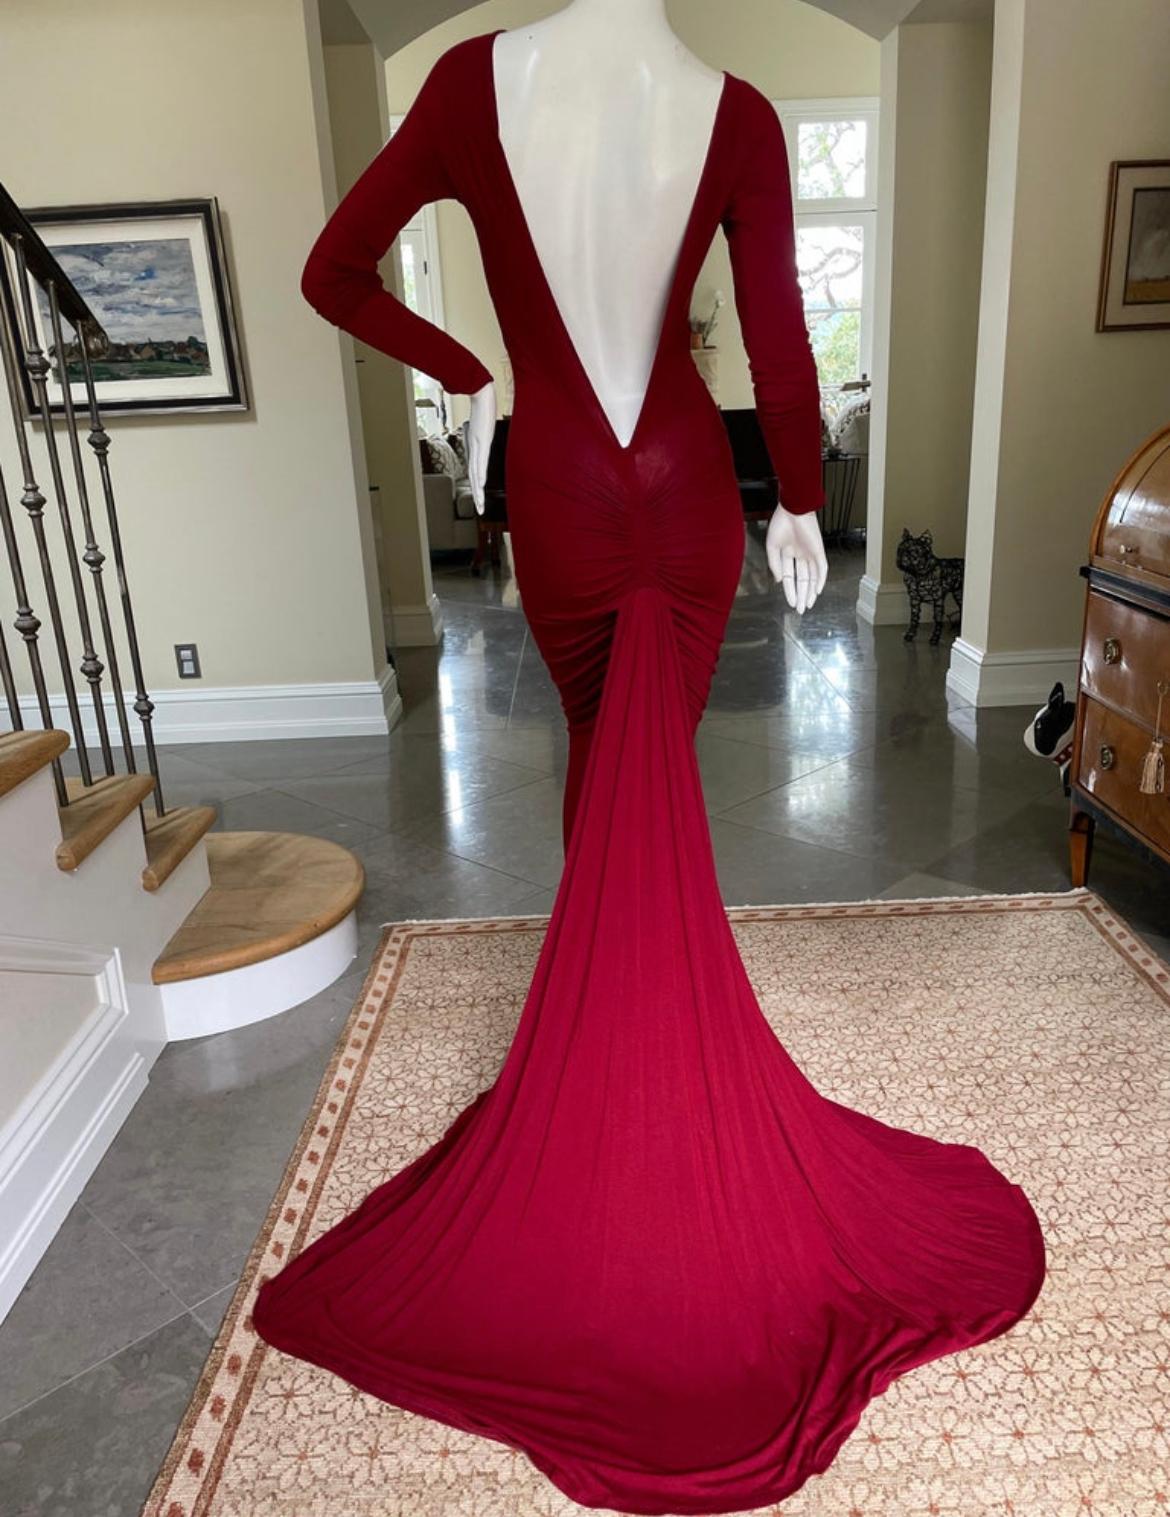 
Donna Karan Vintage Red Jersey Fishtail Evening Dress with Plunging Back .
New with tags.
This is so pretty.
Size S, there is a lot of stretch.
Bust 34